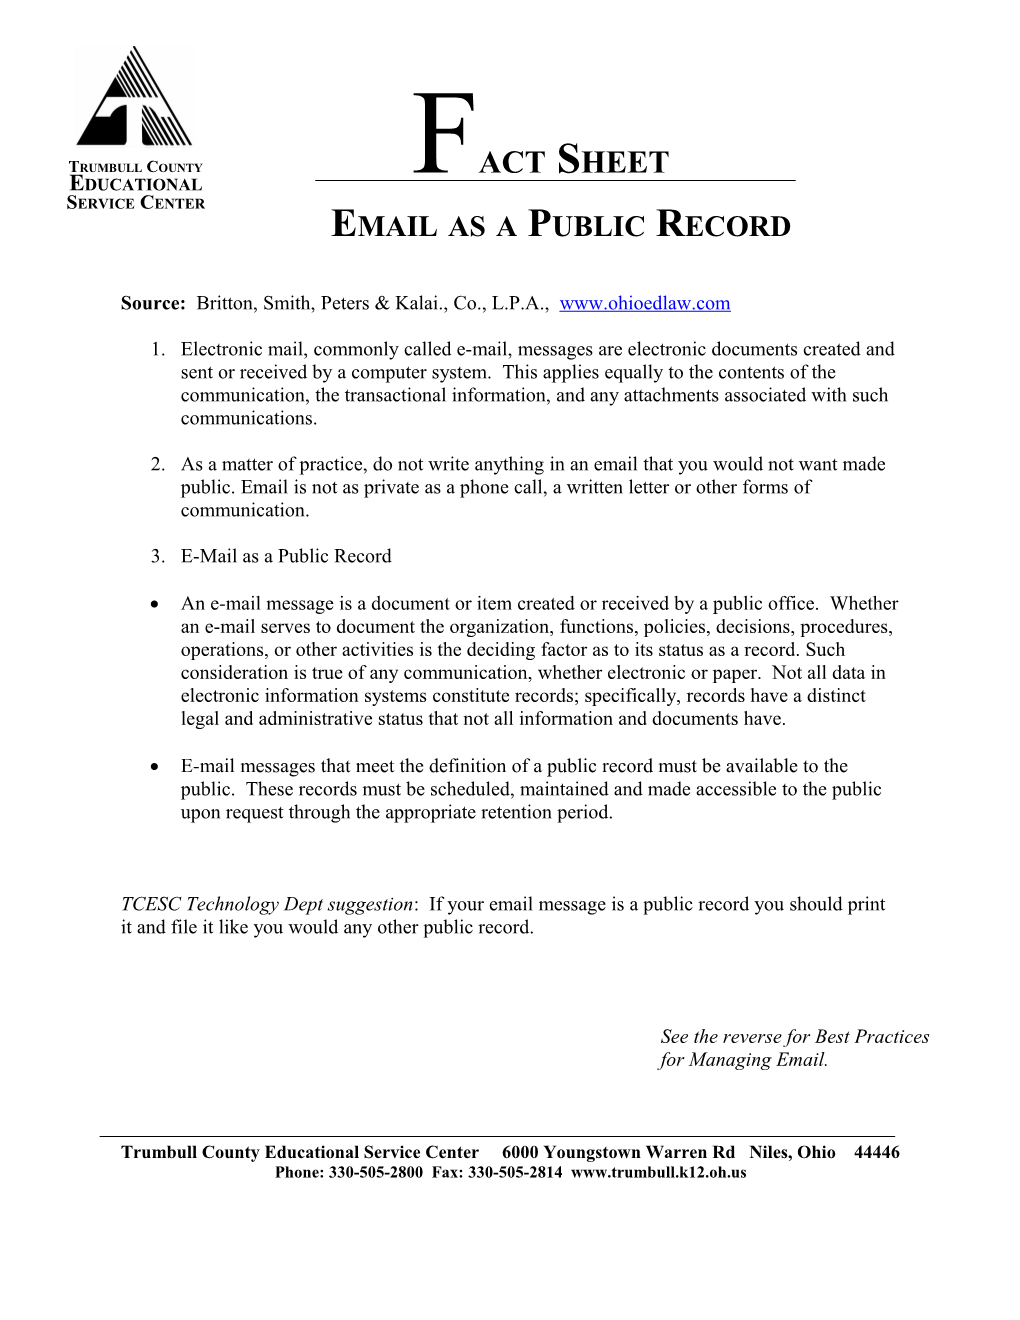 Email As a Public Record